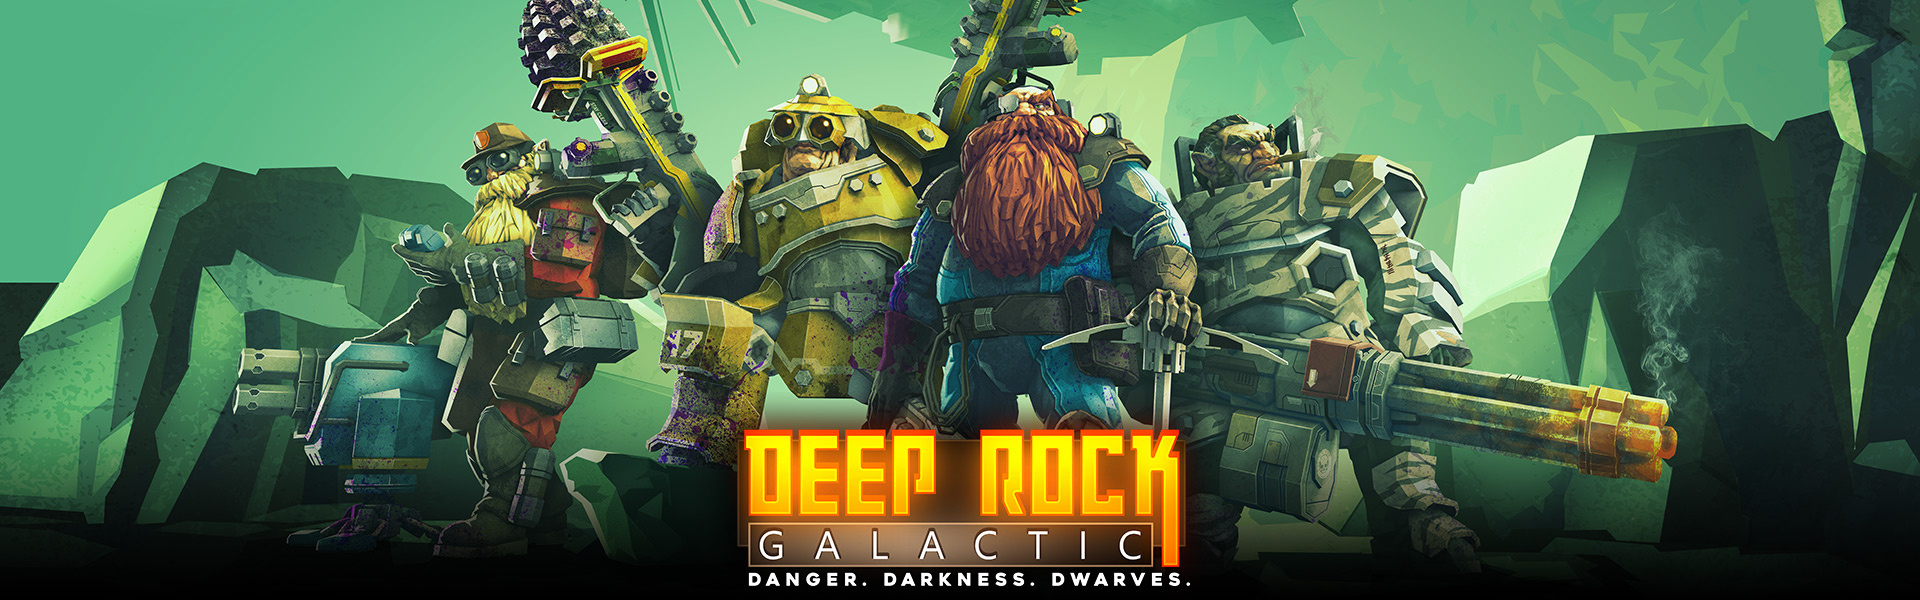 Deep Rock Galactic for Xbox One and Windows 10 | Xbox